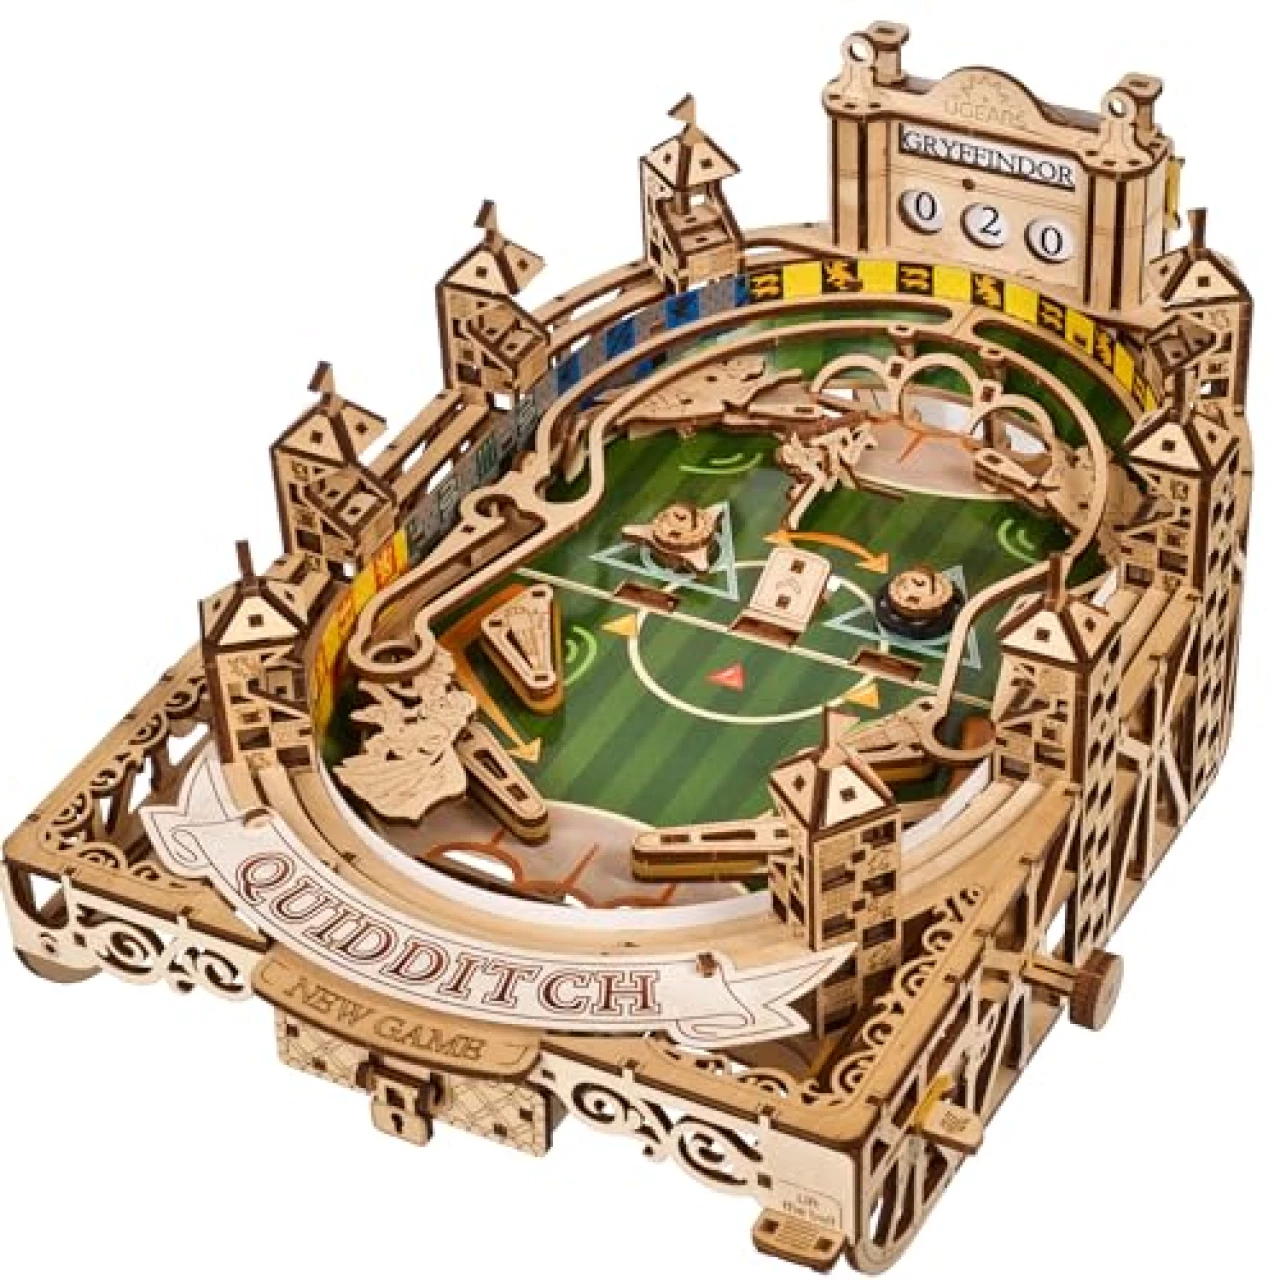 UGEARS Harry Potter Quidditch Pinball Machine - Wooden Models to Build for Adults